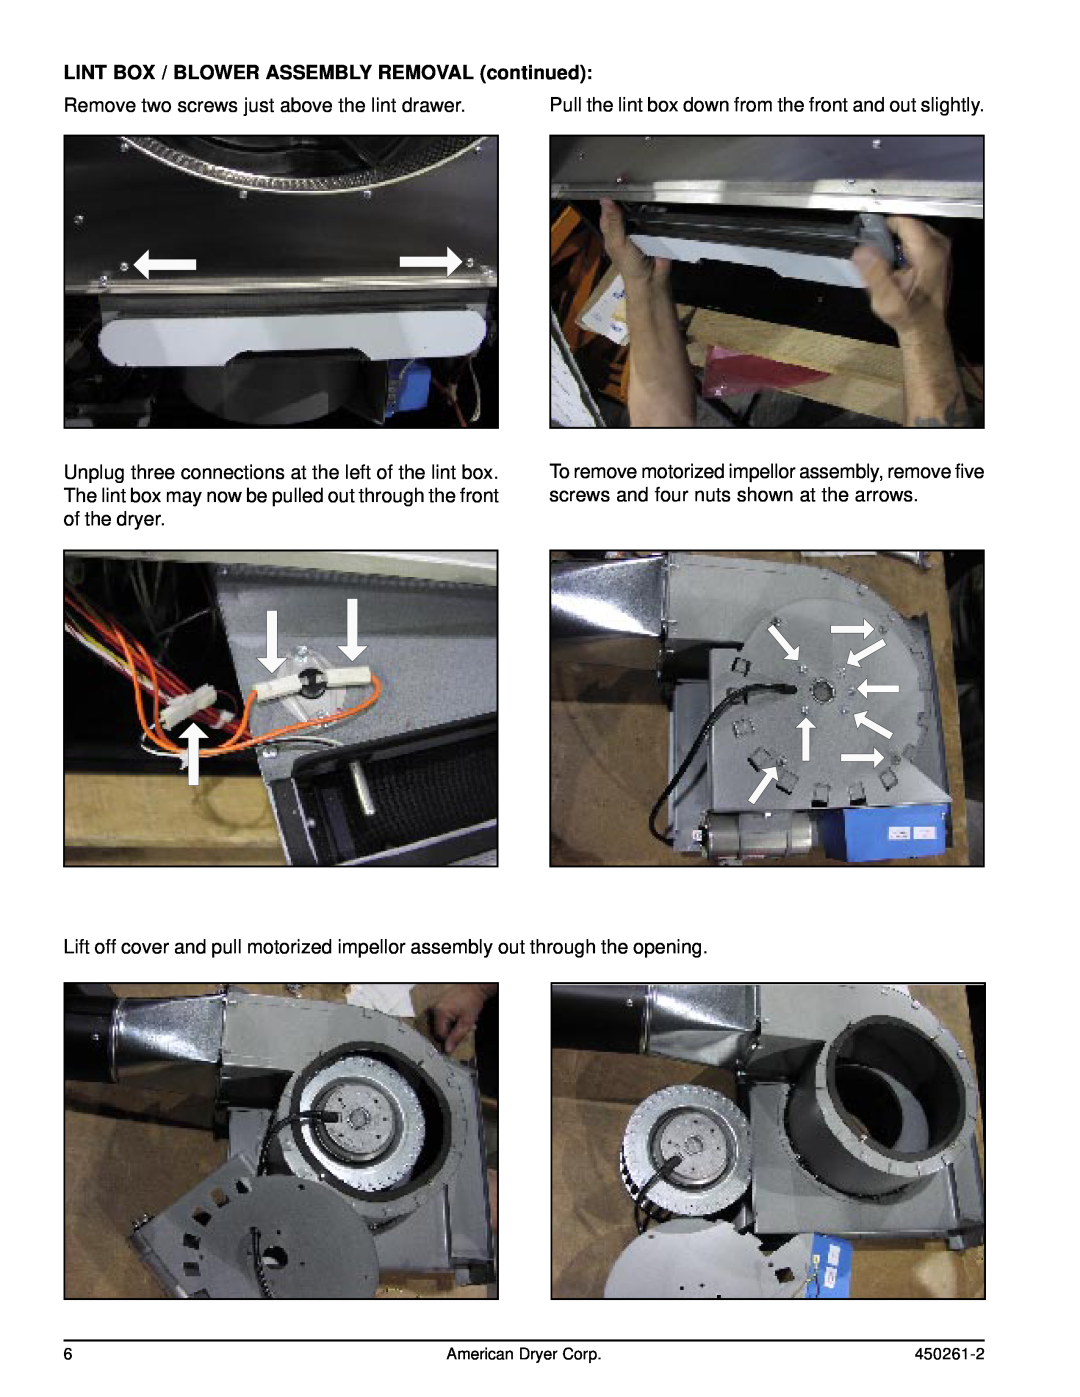 American Dryer Corp D20, CG20, SL20, STI-8, AD-20 manual LINT BOX / BLOWER ASSEMBLY REMOVAL continued 